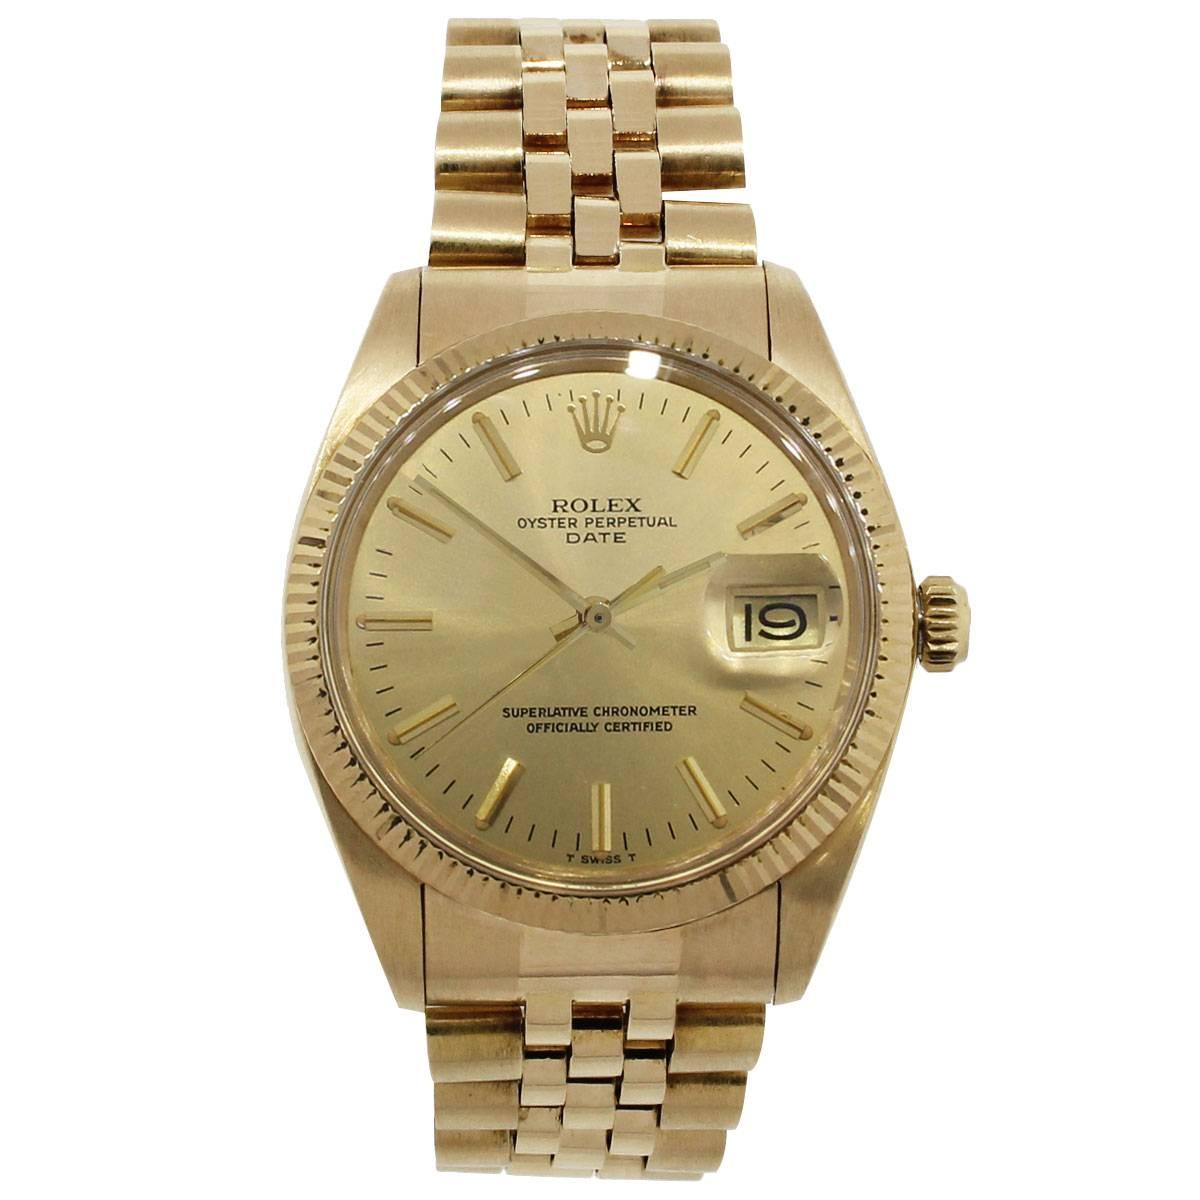 Brand: Rolex
MPN: 1503
Model: Date
Case Material: 18k yellow gold
Case Diameter: 34mm
Crystal: Plastic
Bezel: 18k yellow gold fixed fluted bezel
Dial: Champagne dial with yellow gold hour marker and hands. Date is displayed at 3 o’ clock.
Bracelet: